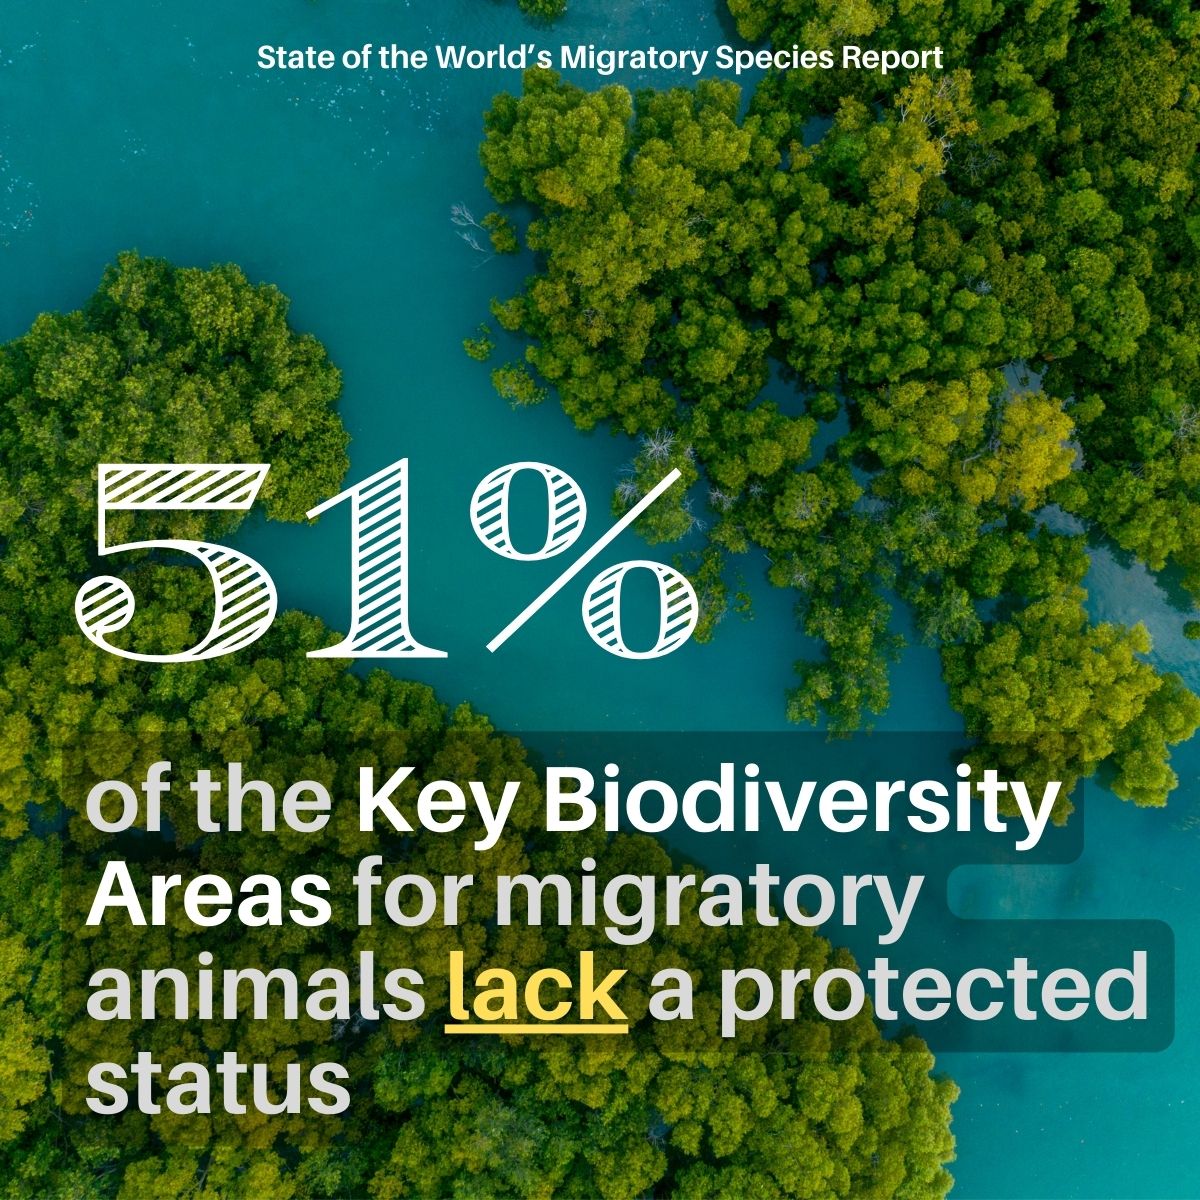 Today is International #ForestDay! 🌳

Forests provide important habitat & Key Biodiversity Areas for migratory animals.

But many of these areas lack a  protected status!

See latest UN Report on the State of the World's #migratoryspecies.

cms.int/en/publication…